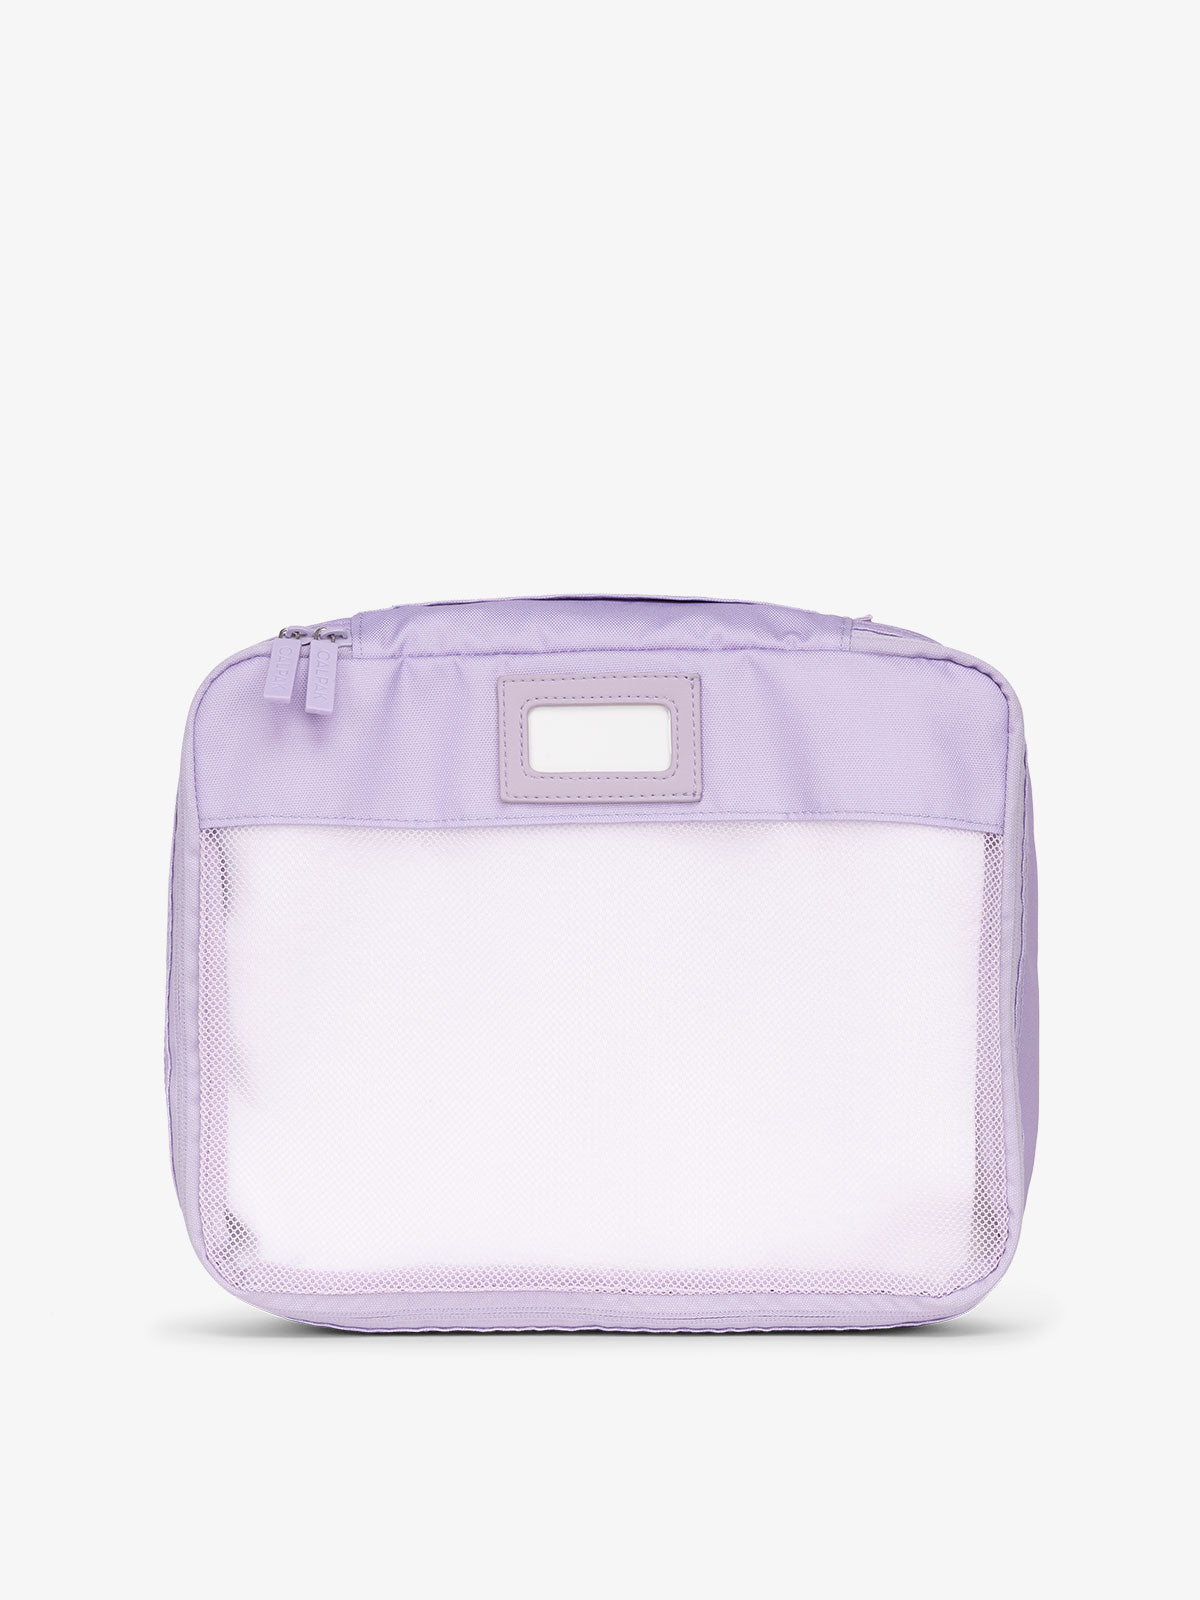 CALPAK luggage packing cubes for clothes with mesh front and label in lavender